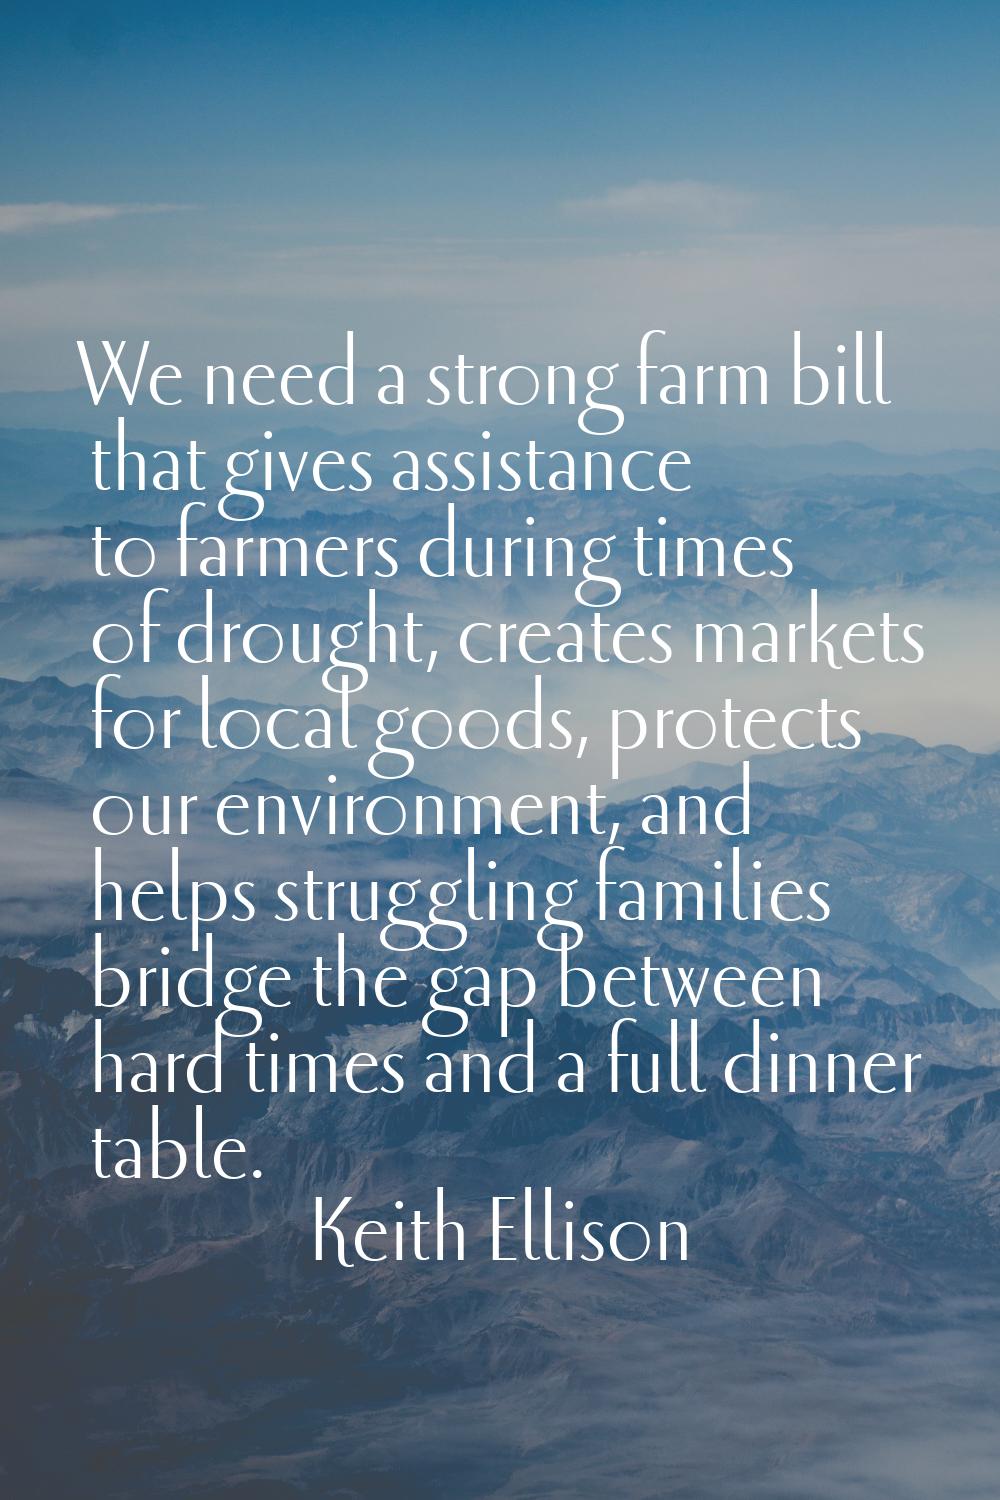 We need a strong farm bill that gives assistance to farmers during times of drought, creates market